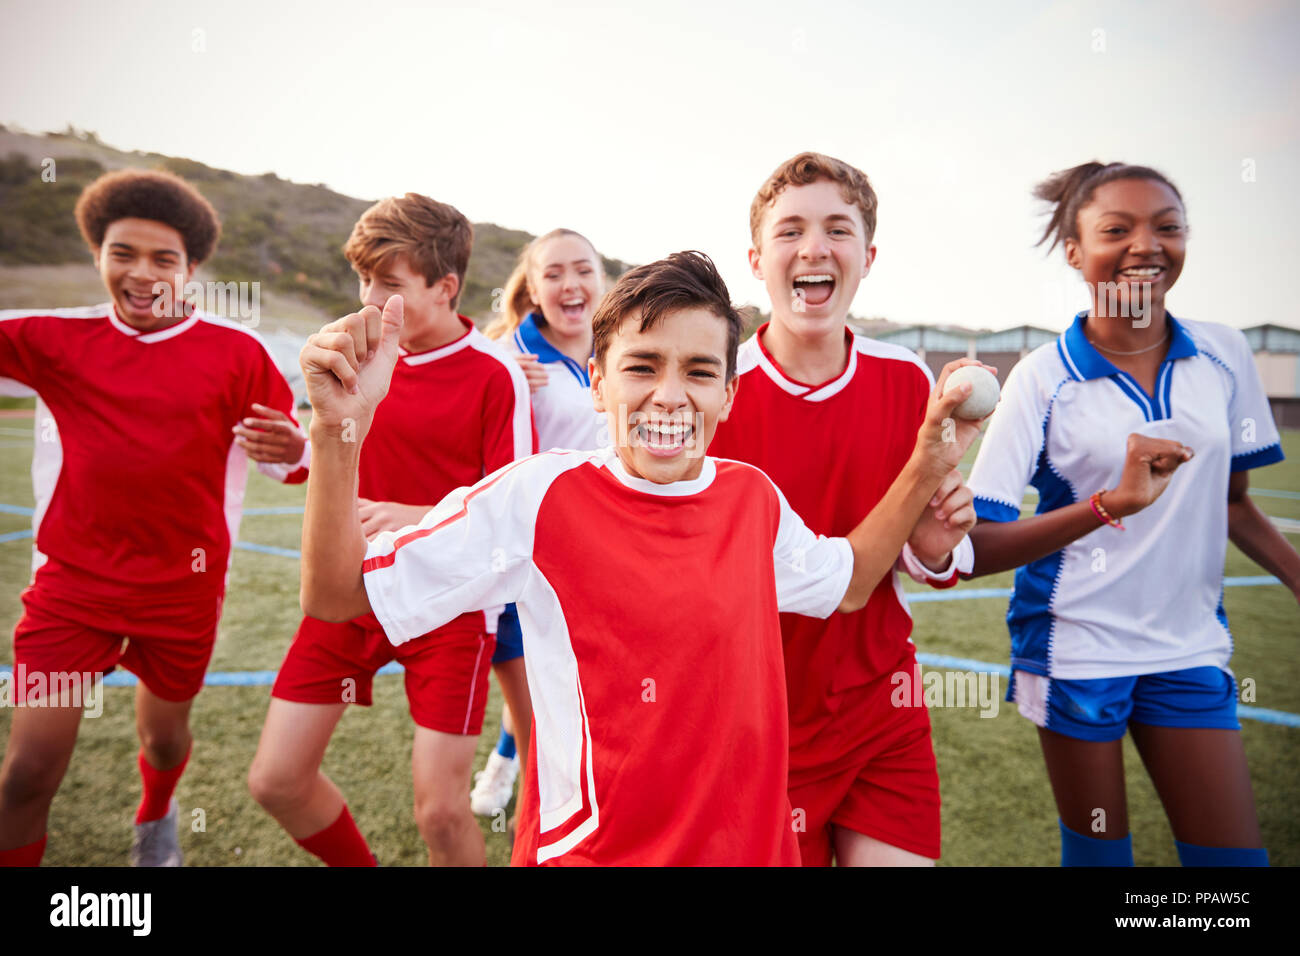 Portrait Of Male And Female High School Soccer Teams Celebrating Stock Photo